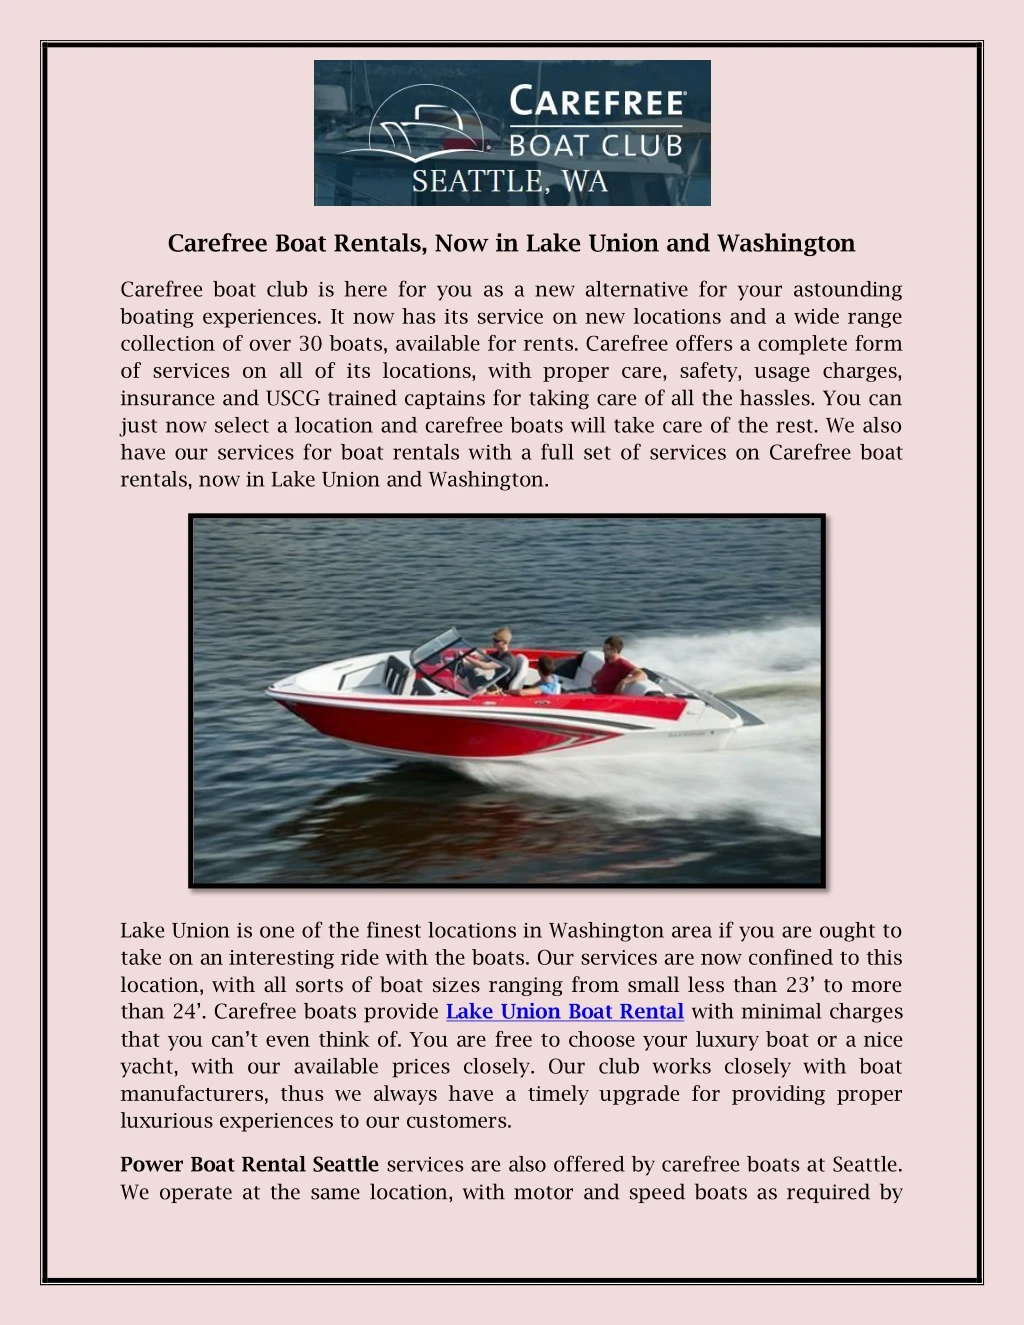 carefree boat rentals now in lake union